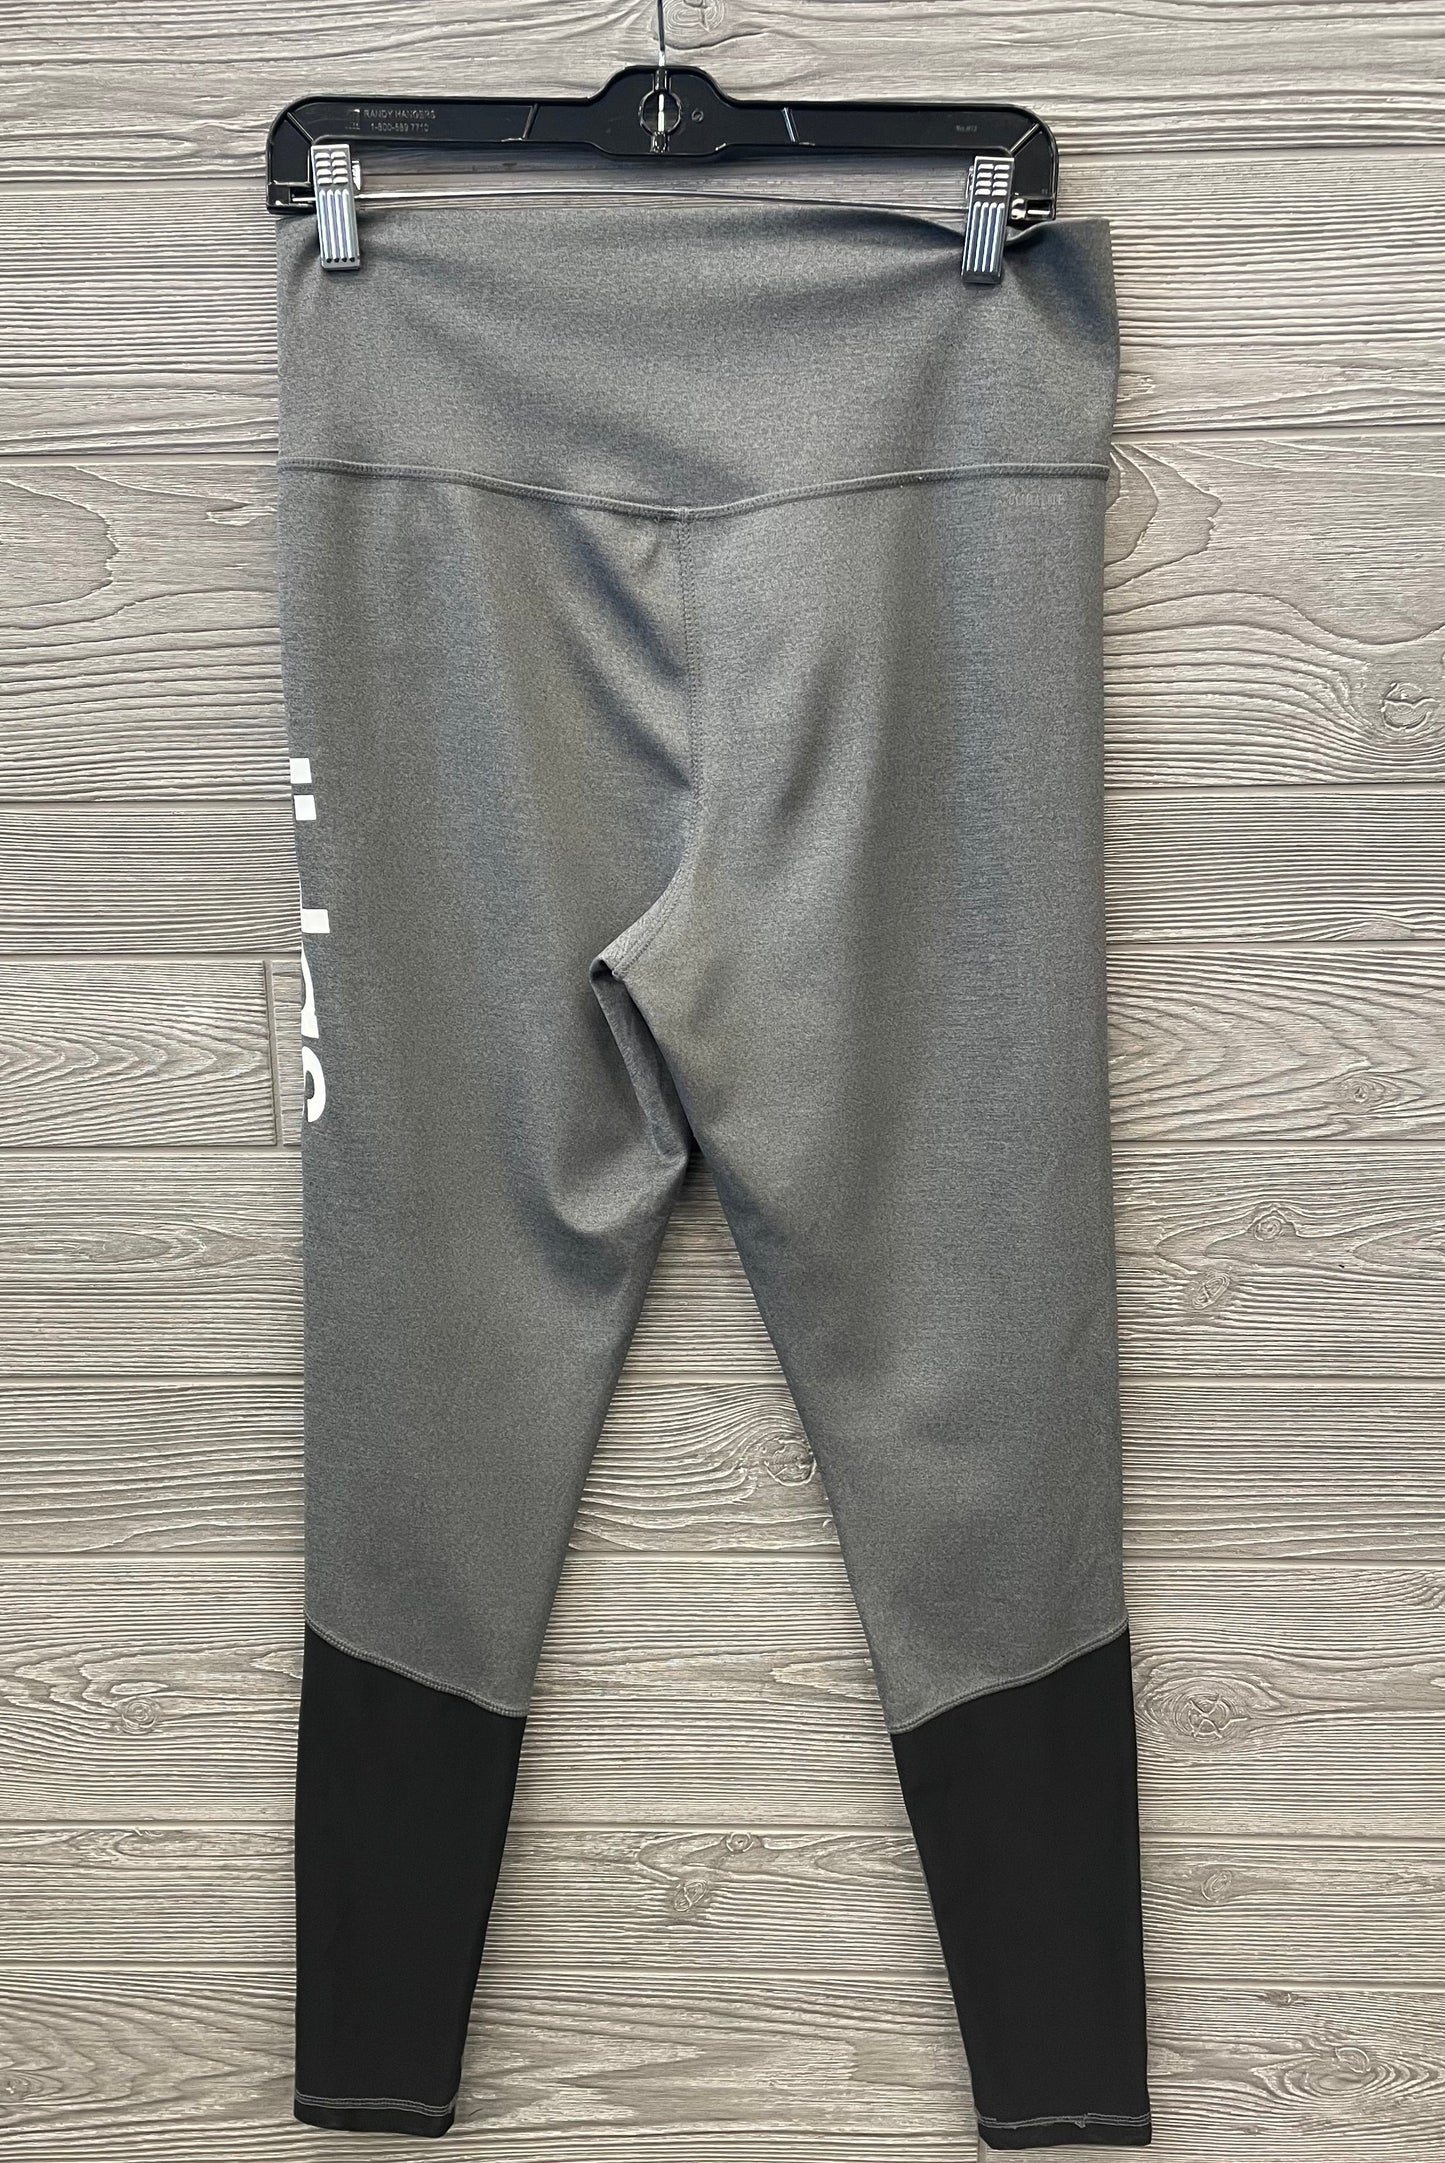 Athletic Leggings By Adidas  Size: L